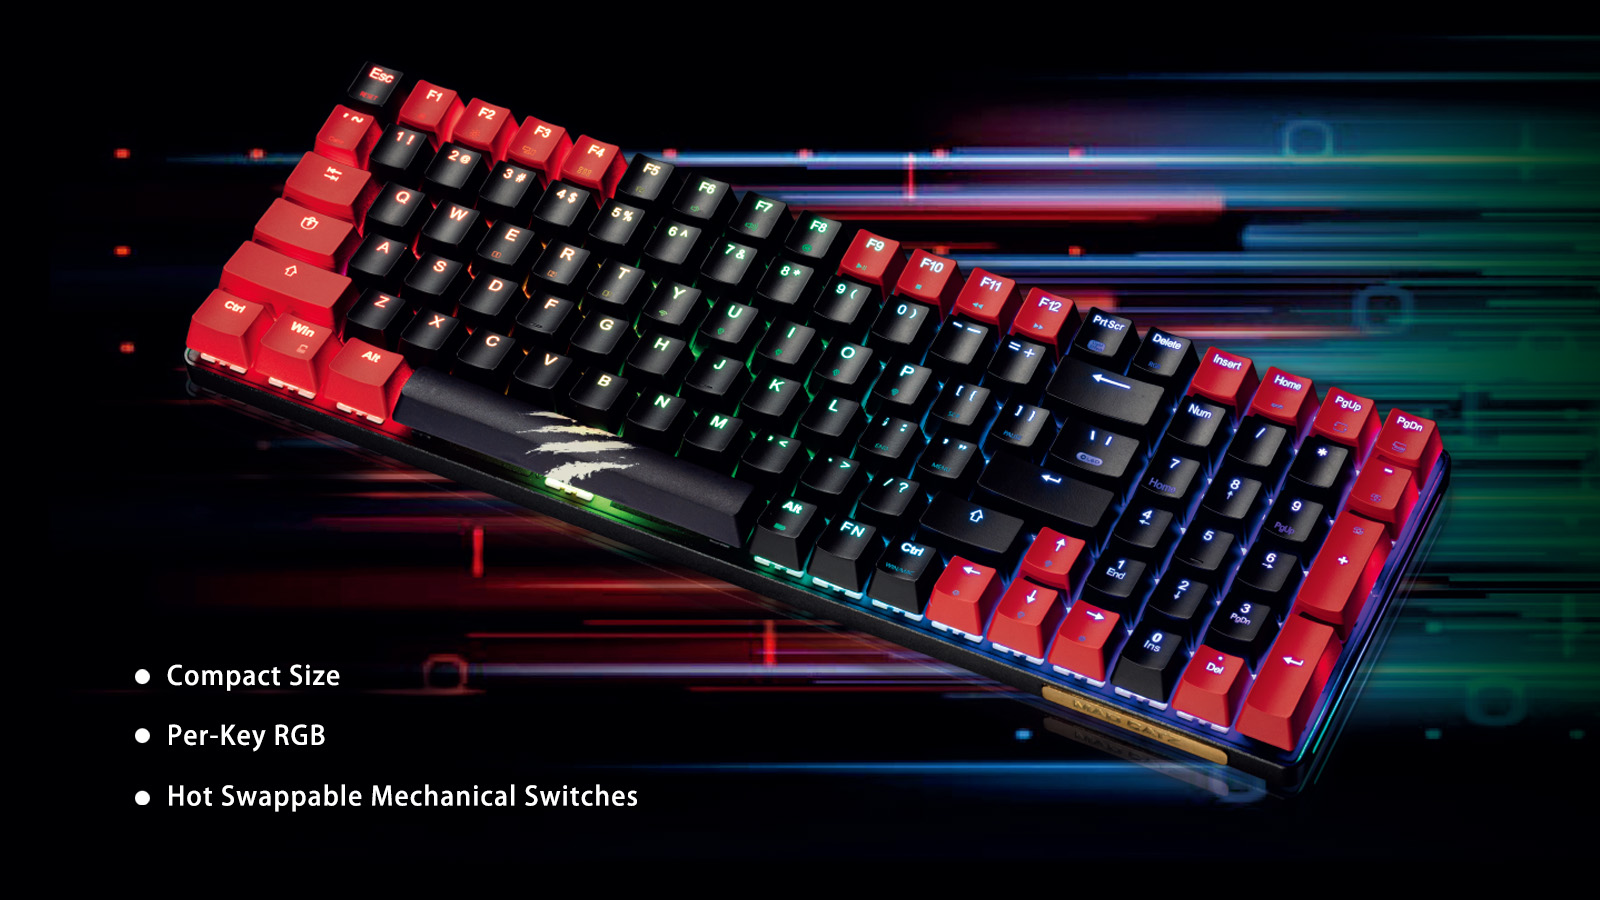 Introducing the S.T.R.I.K.E. 11: Mad Catz's versatile wireless gaming keyboard with tri-mode connectivity, compact design, and premium build quality.